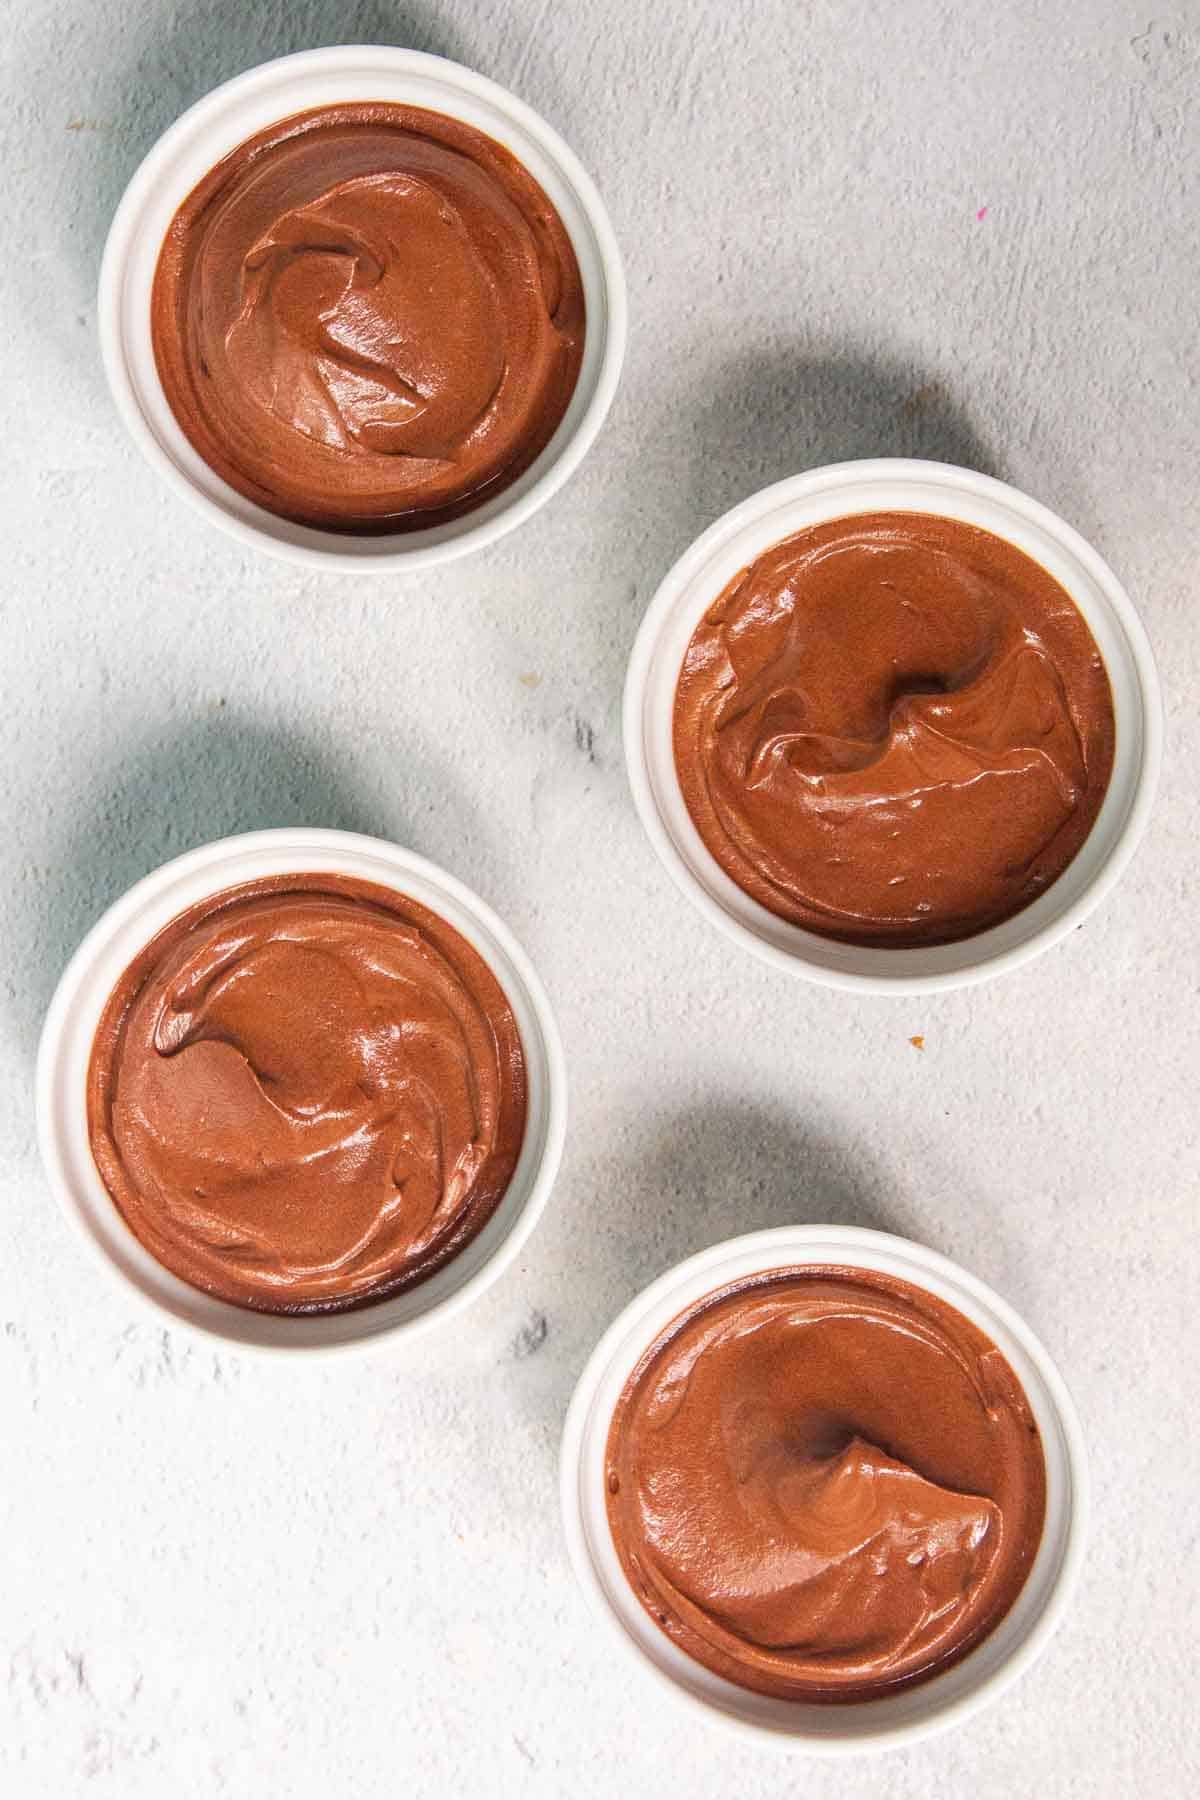 Chocolate mousse mixture divided evenly into four small ramekins